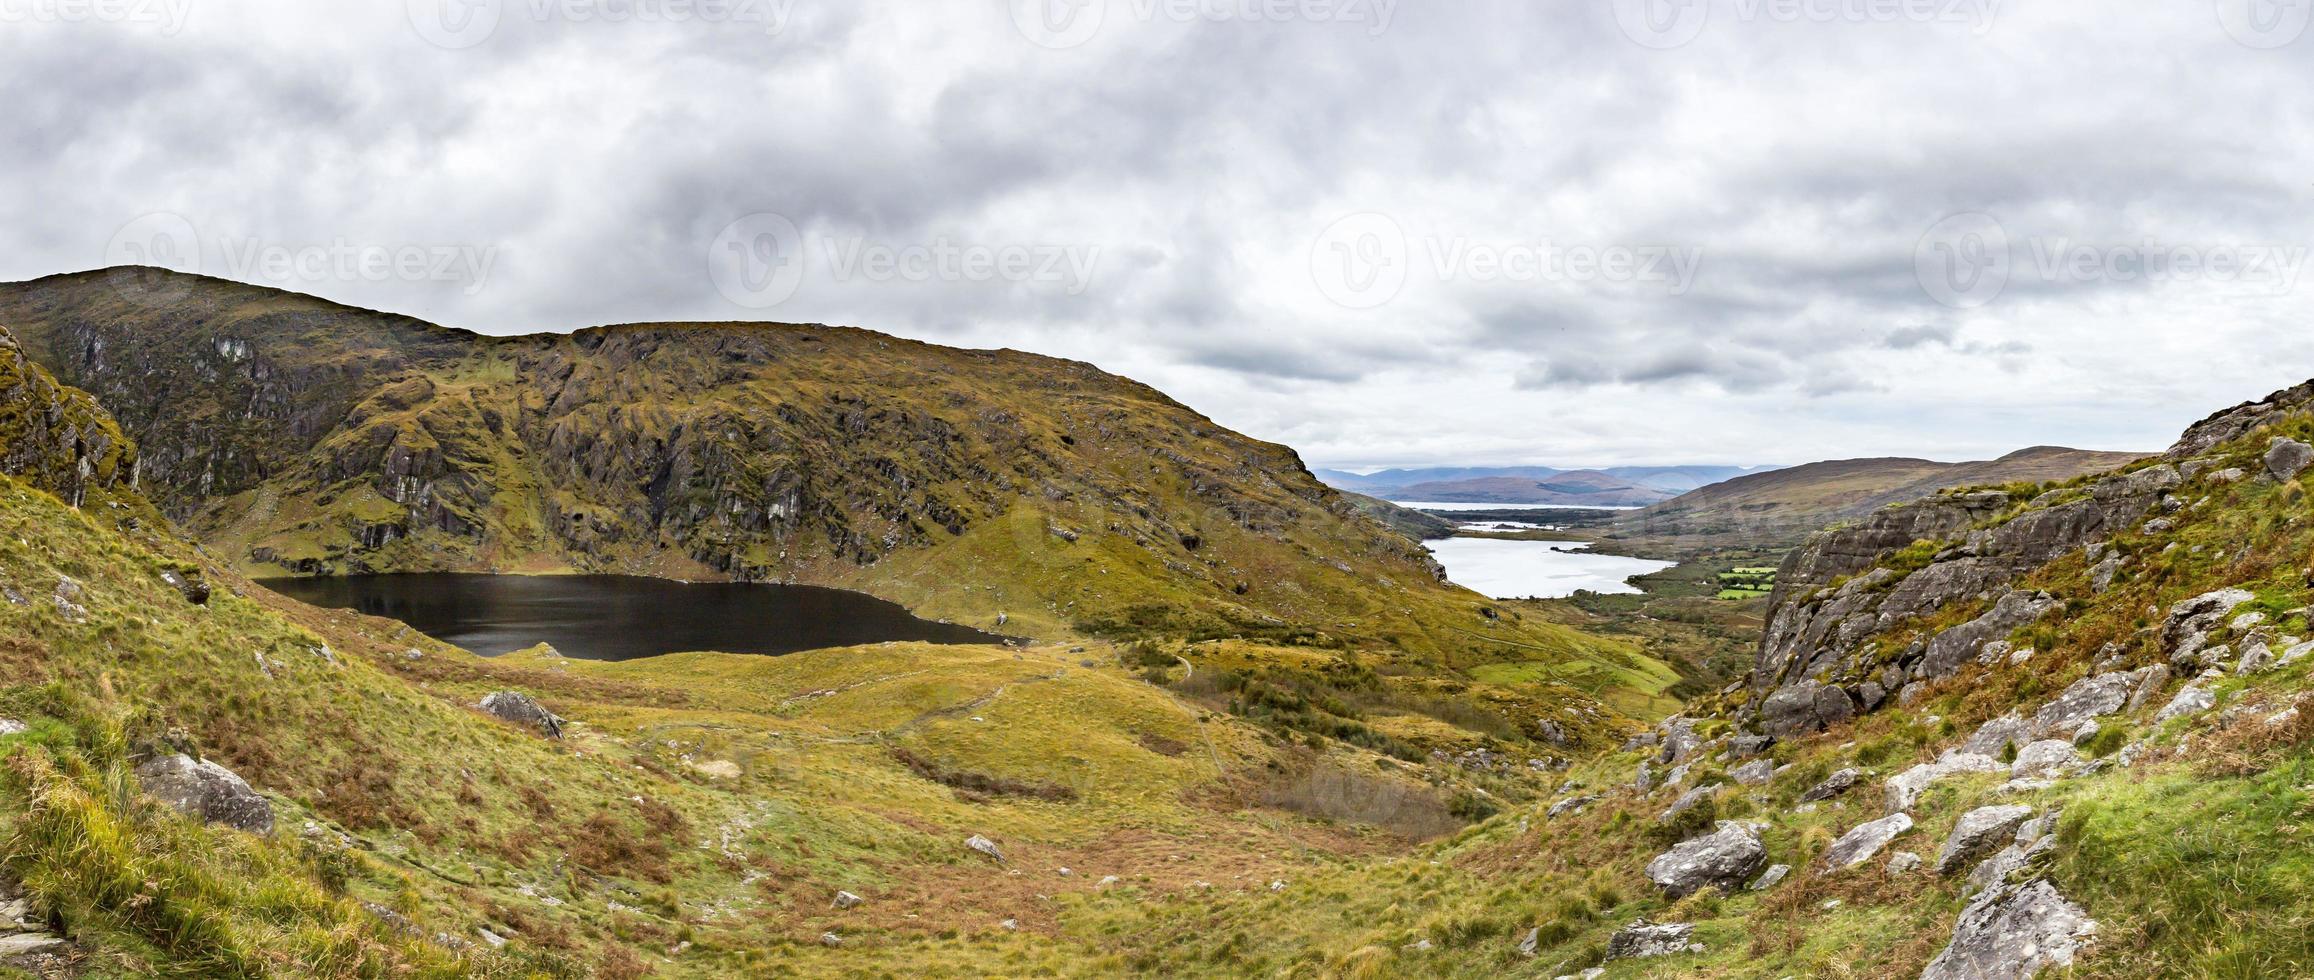 Panorama picture of typical Irish landscape with green meadows and rough mountains during daytime photo